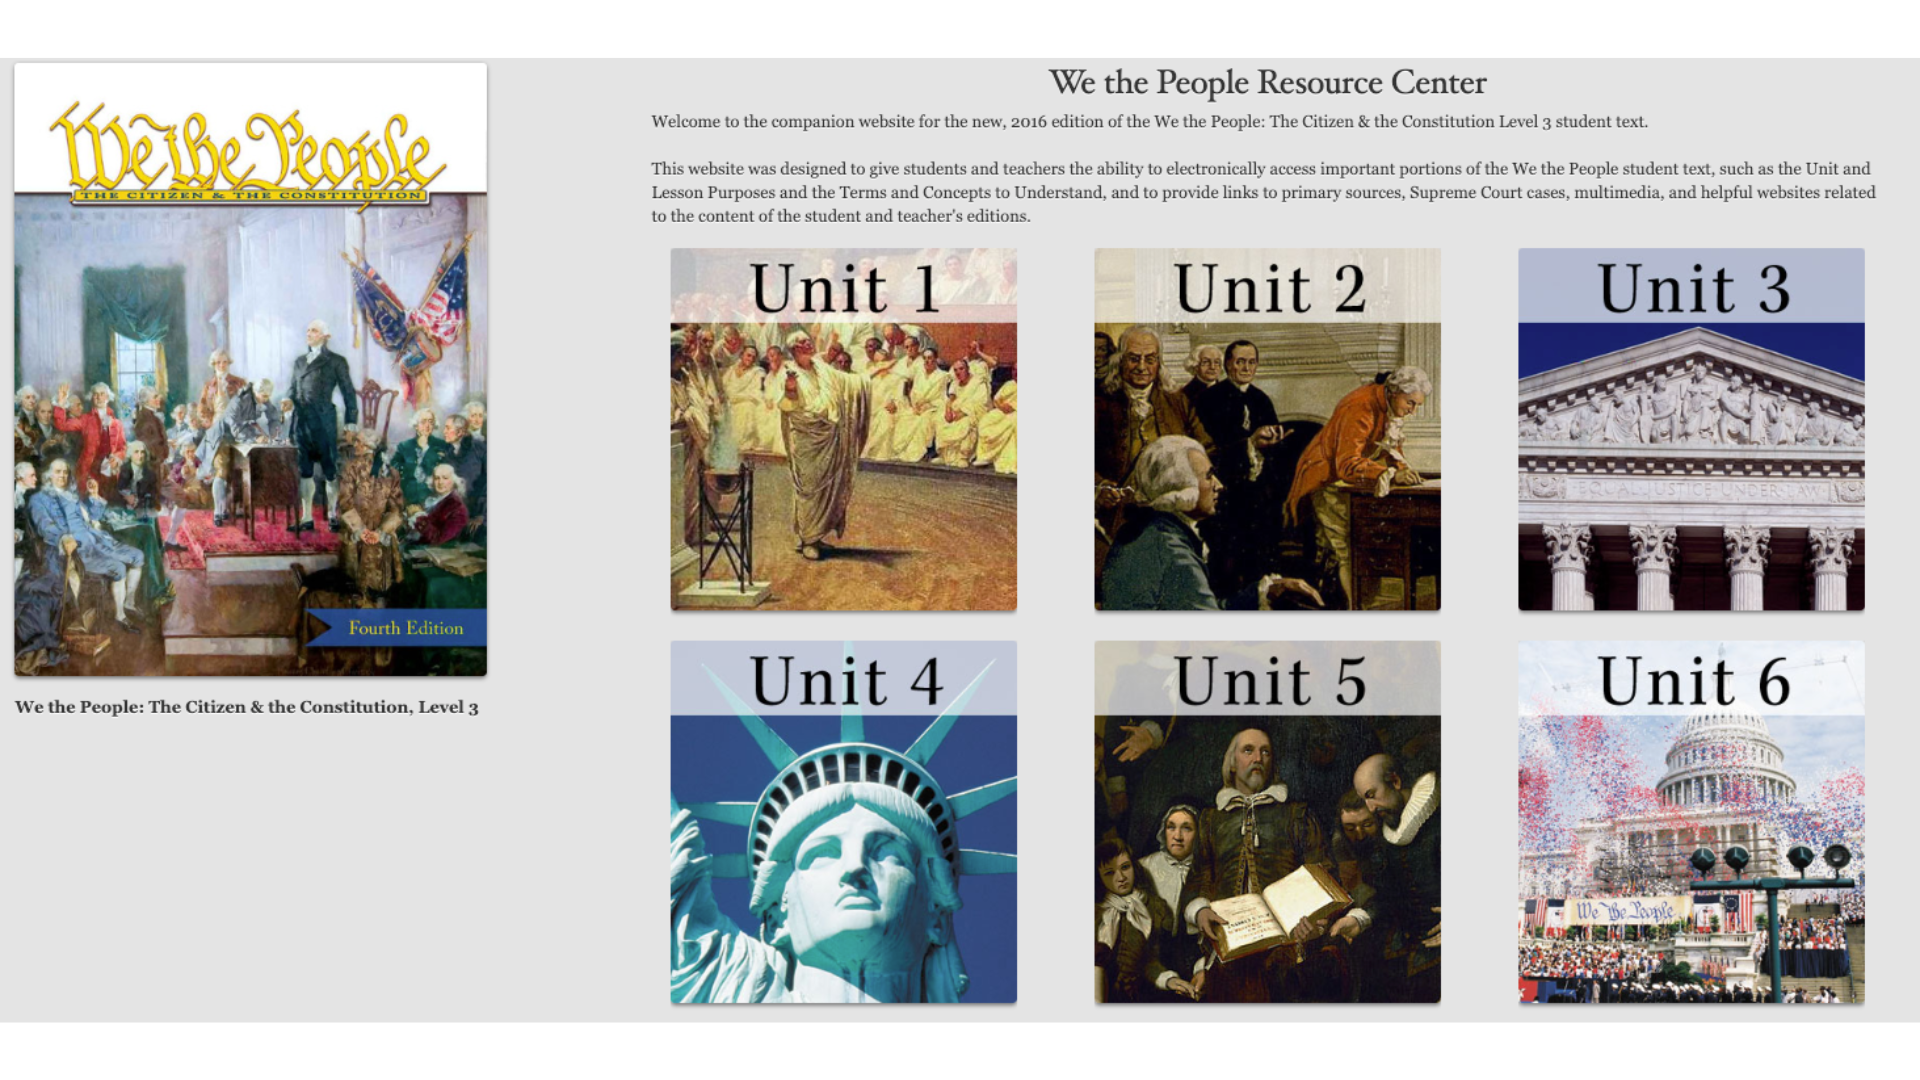 Check Out the We the People Resource Center!